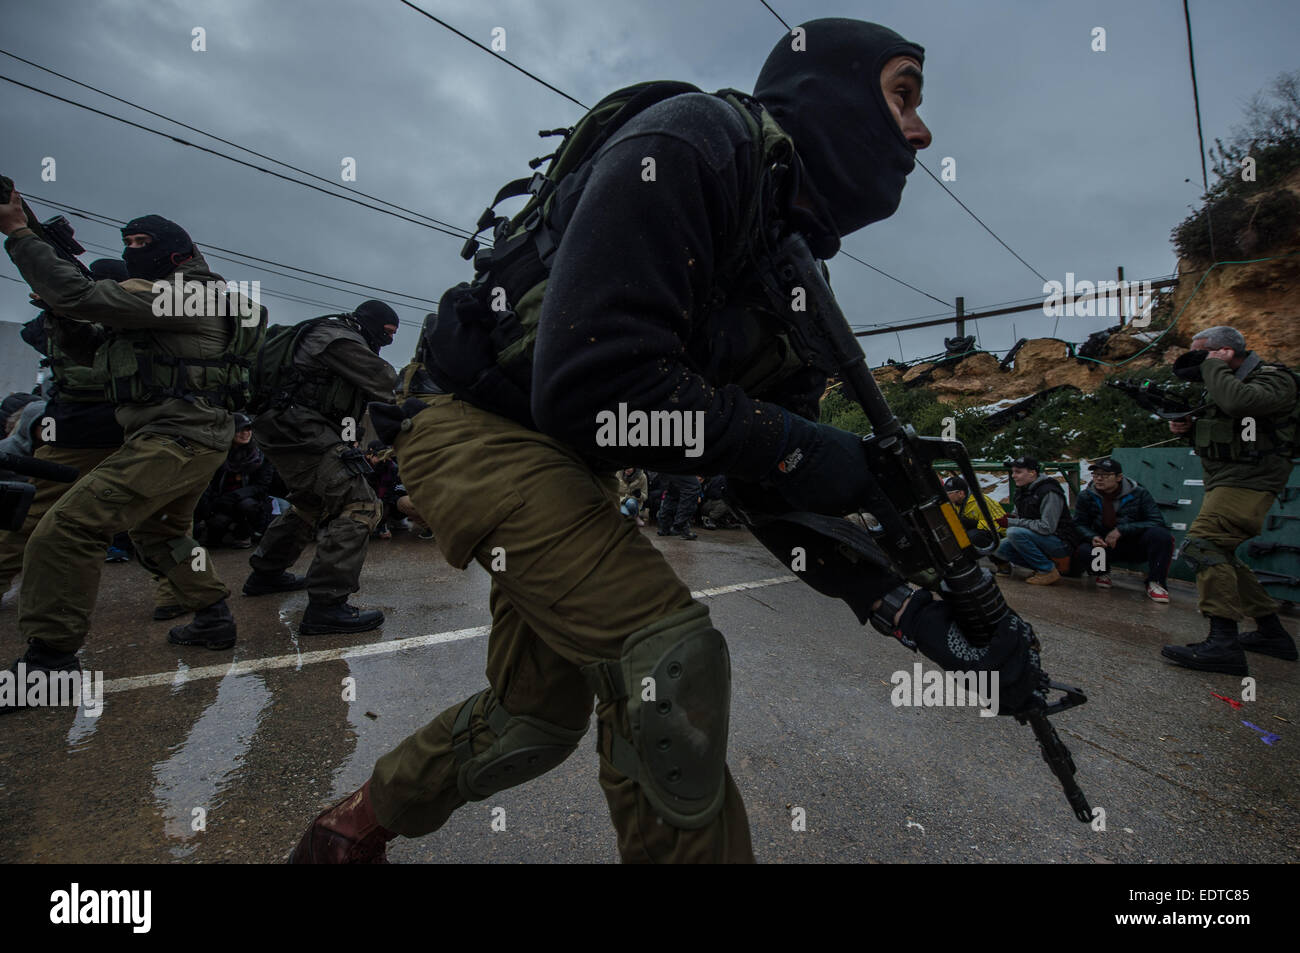 (150109) -- GUSH ETZION, Jan. 9, 2015 (Xinhua) -- Israeli instructors simulate a counter-terror operation for China's Hong Kong students and teachers during a military and counter-terror drill at 'Caliber 3' Israeli Counter Terror and Security Academy in Gush Etzion, south of Jerusalem, on Jan. 9, 2015. One hundred China's Hong Kong students and teachers started the four-day Techcacker Lab programme jointly organized by the Li Ka Shing Foundation and the Technion-Israel Institute of Technology. The Techcracker Lab programme is designed around the Hebrew word 'chutzpah', which means fearless an Stock Photo